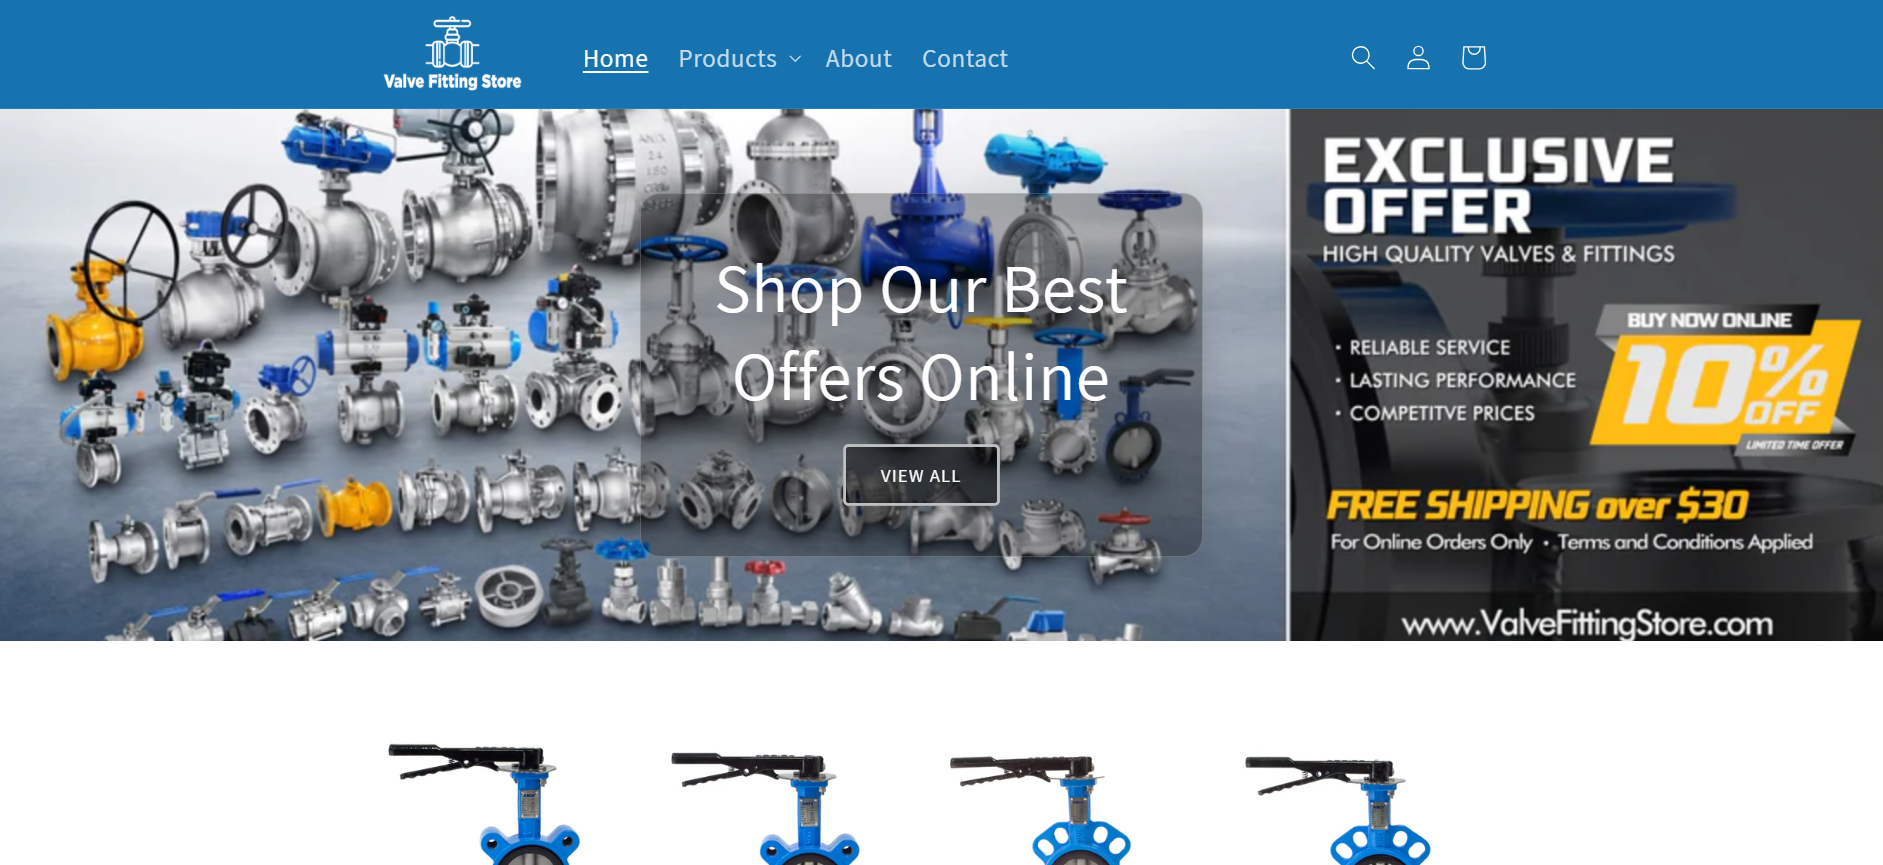 Buy Valves Online at ValveFittingStore: The Top Source for Industrial Valves and Fittings